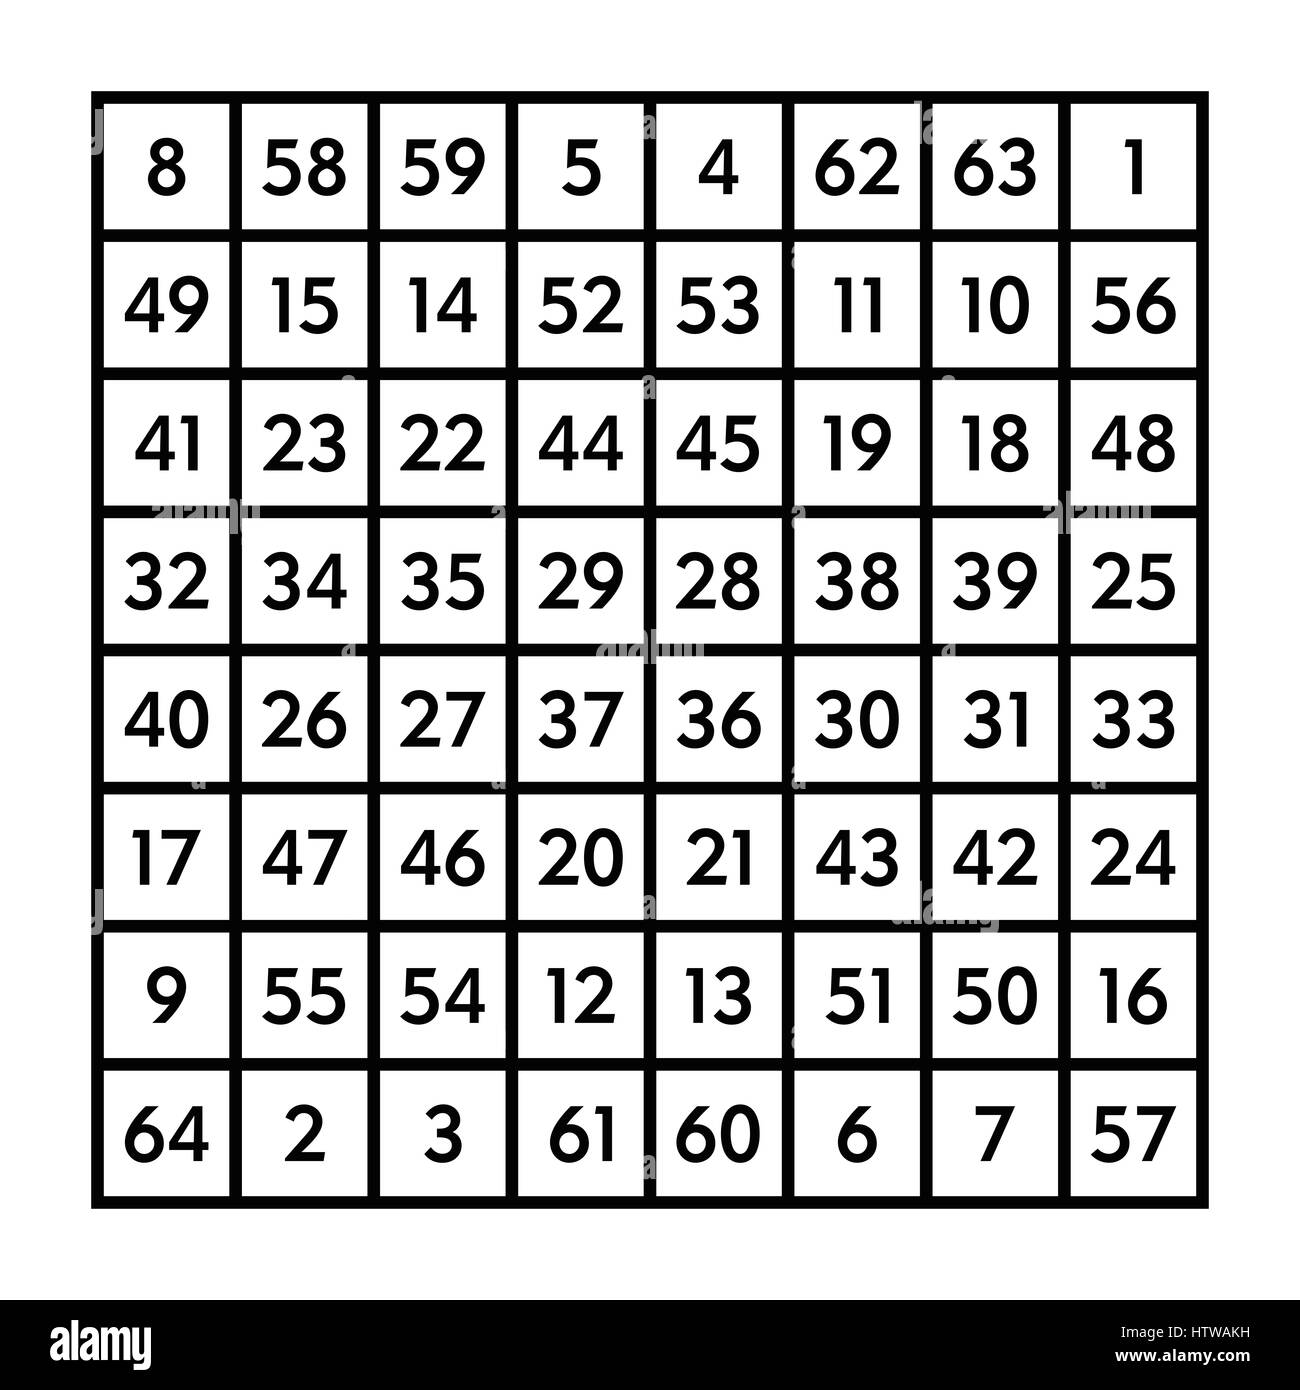 8x8 magic square of order 8 and astrological planet Mercury with magic constant 260. The sum of numbers in any row, column, or diagonal is always 260. Stock Photo